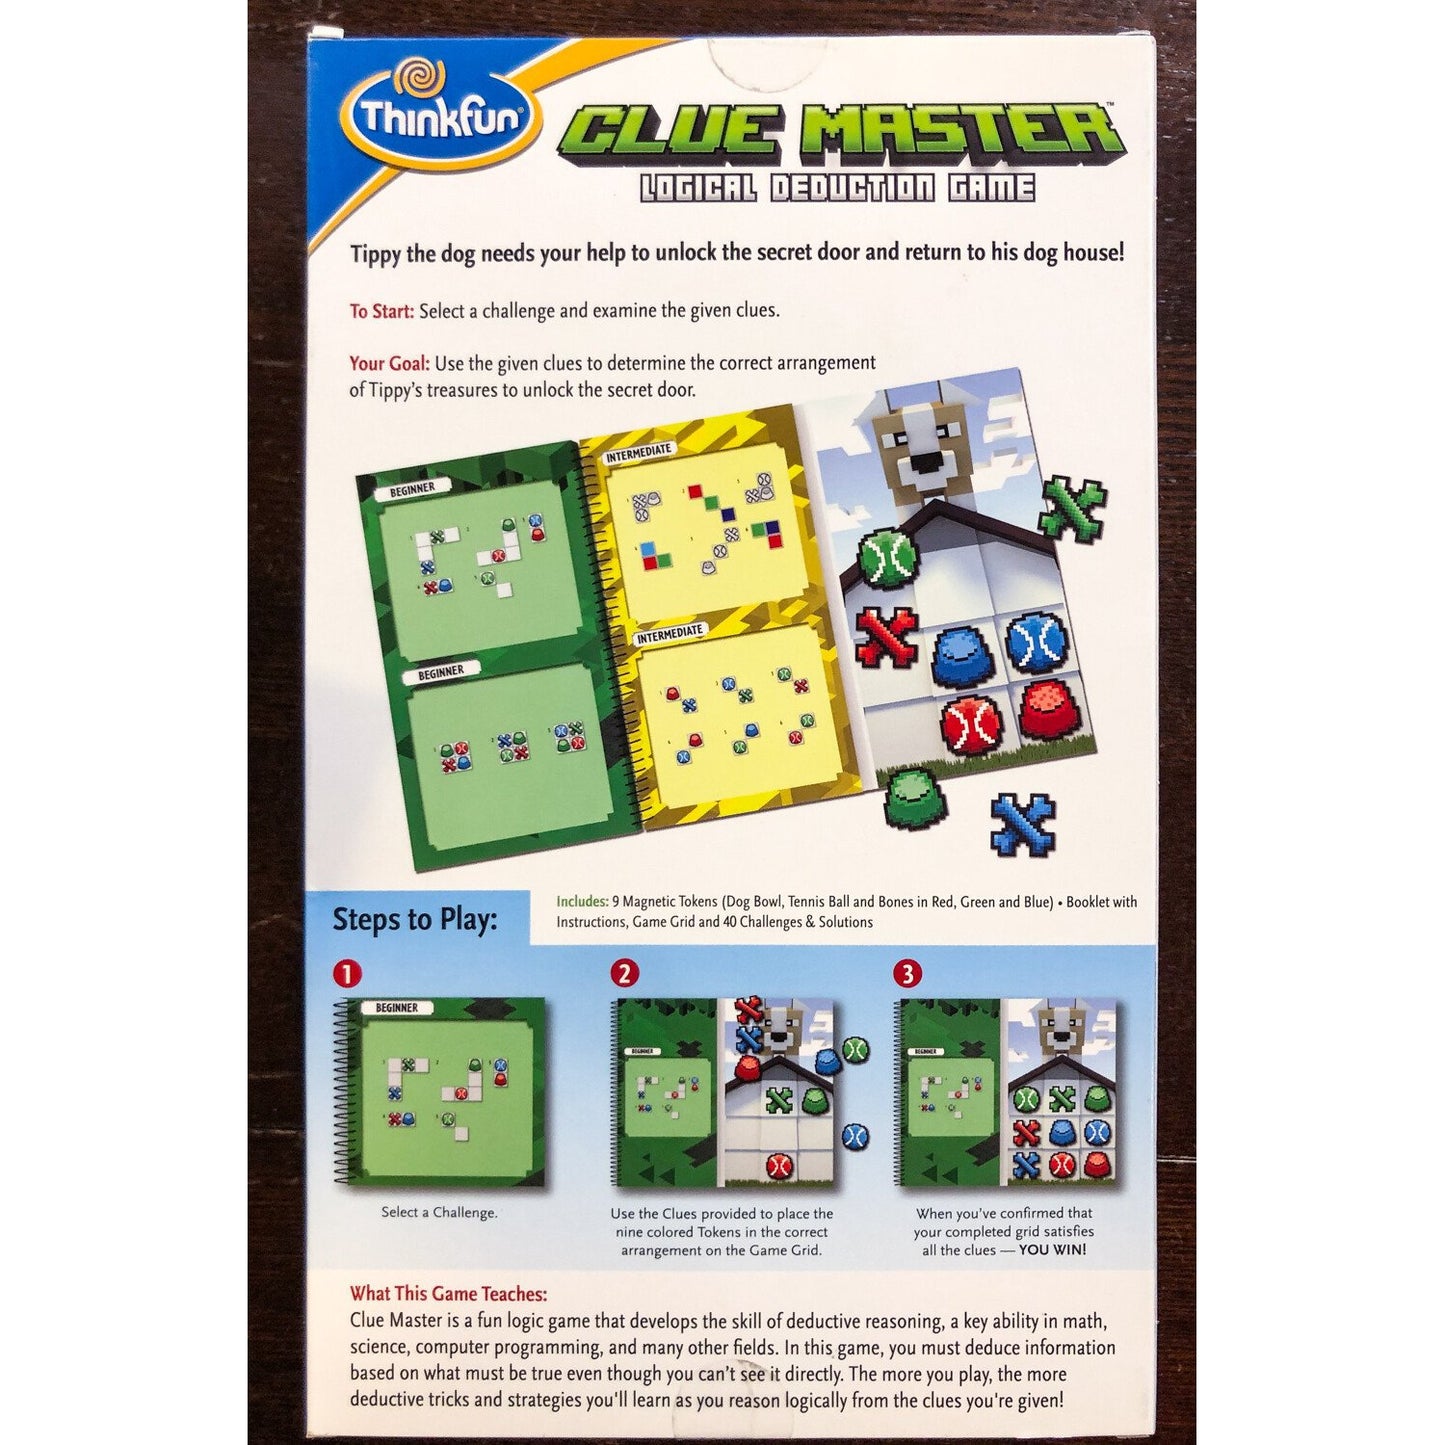 Clue Master - Logical deduction game